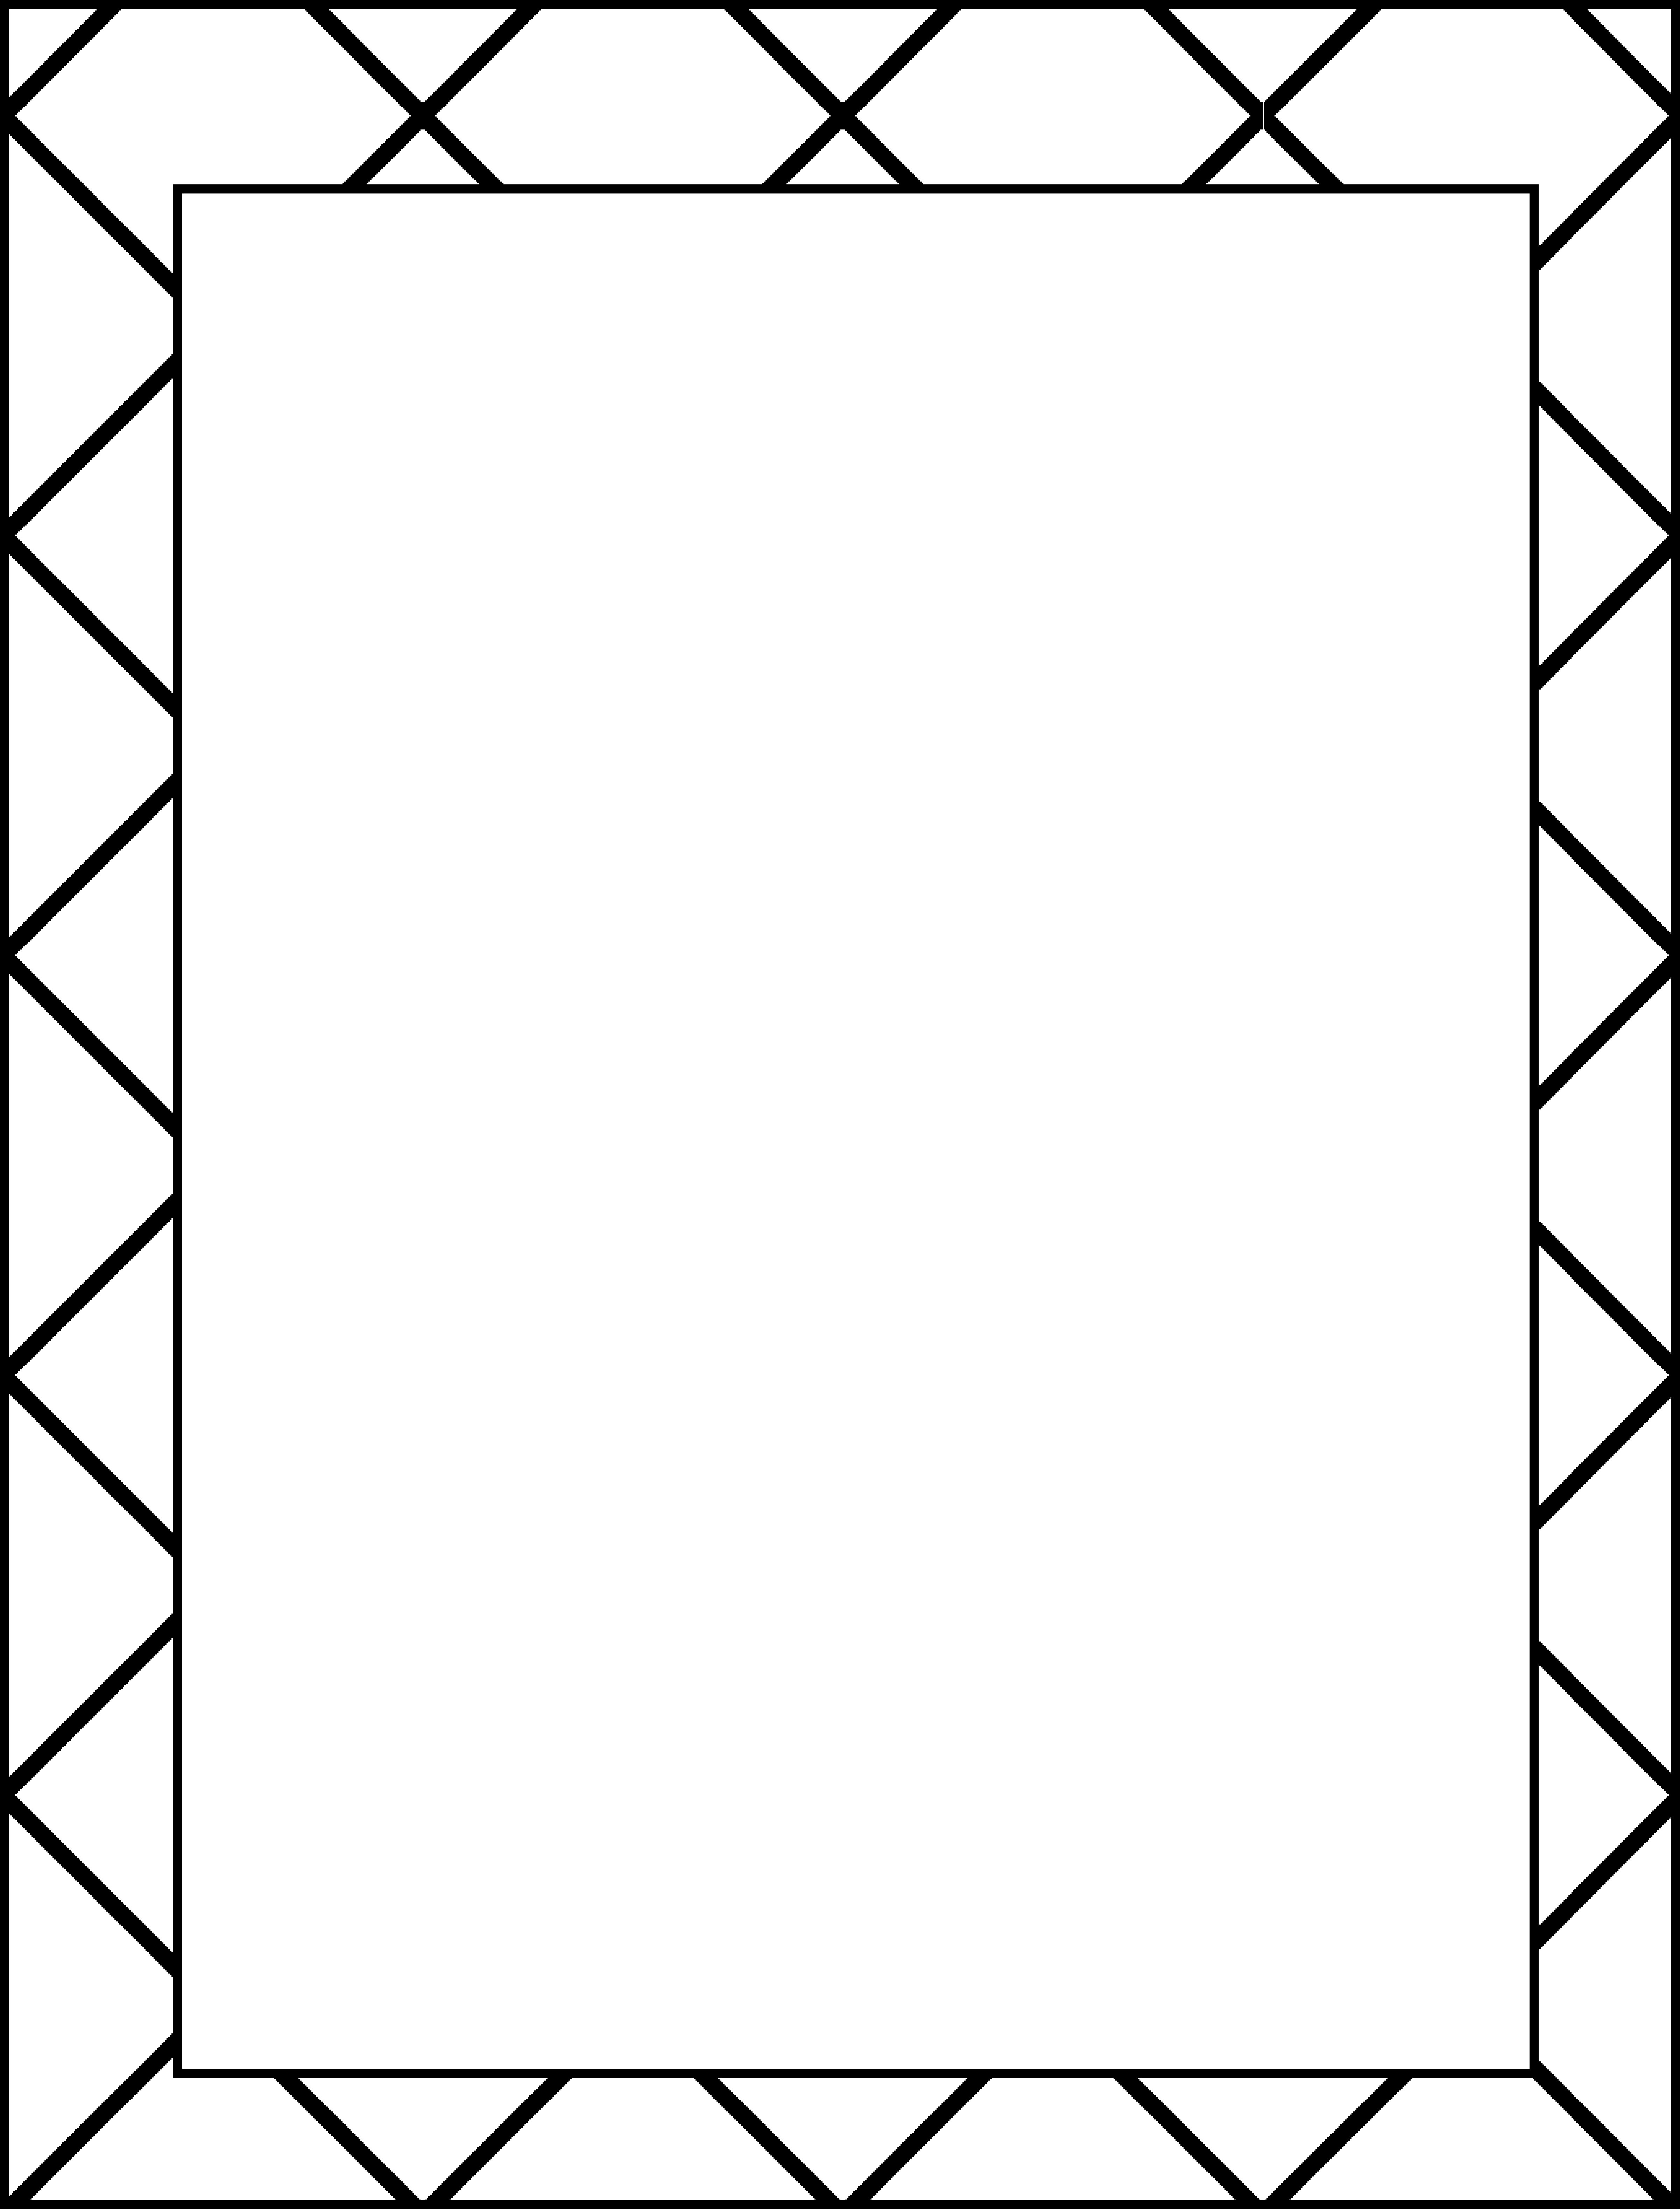 Borders For Invitations - ClipArt Best